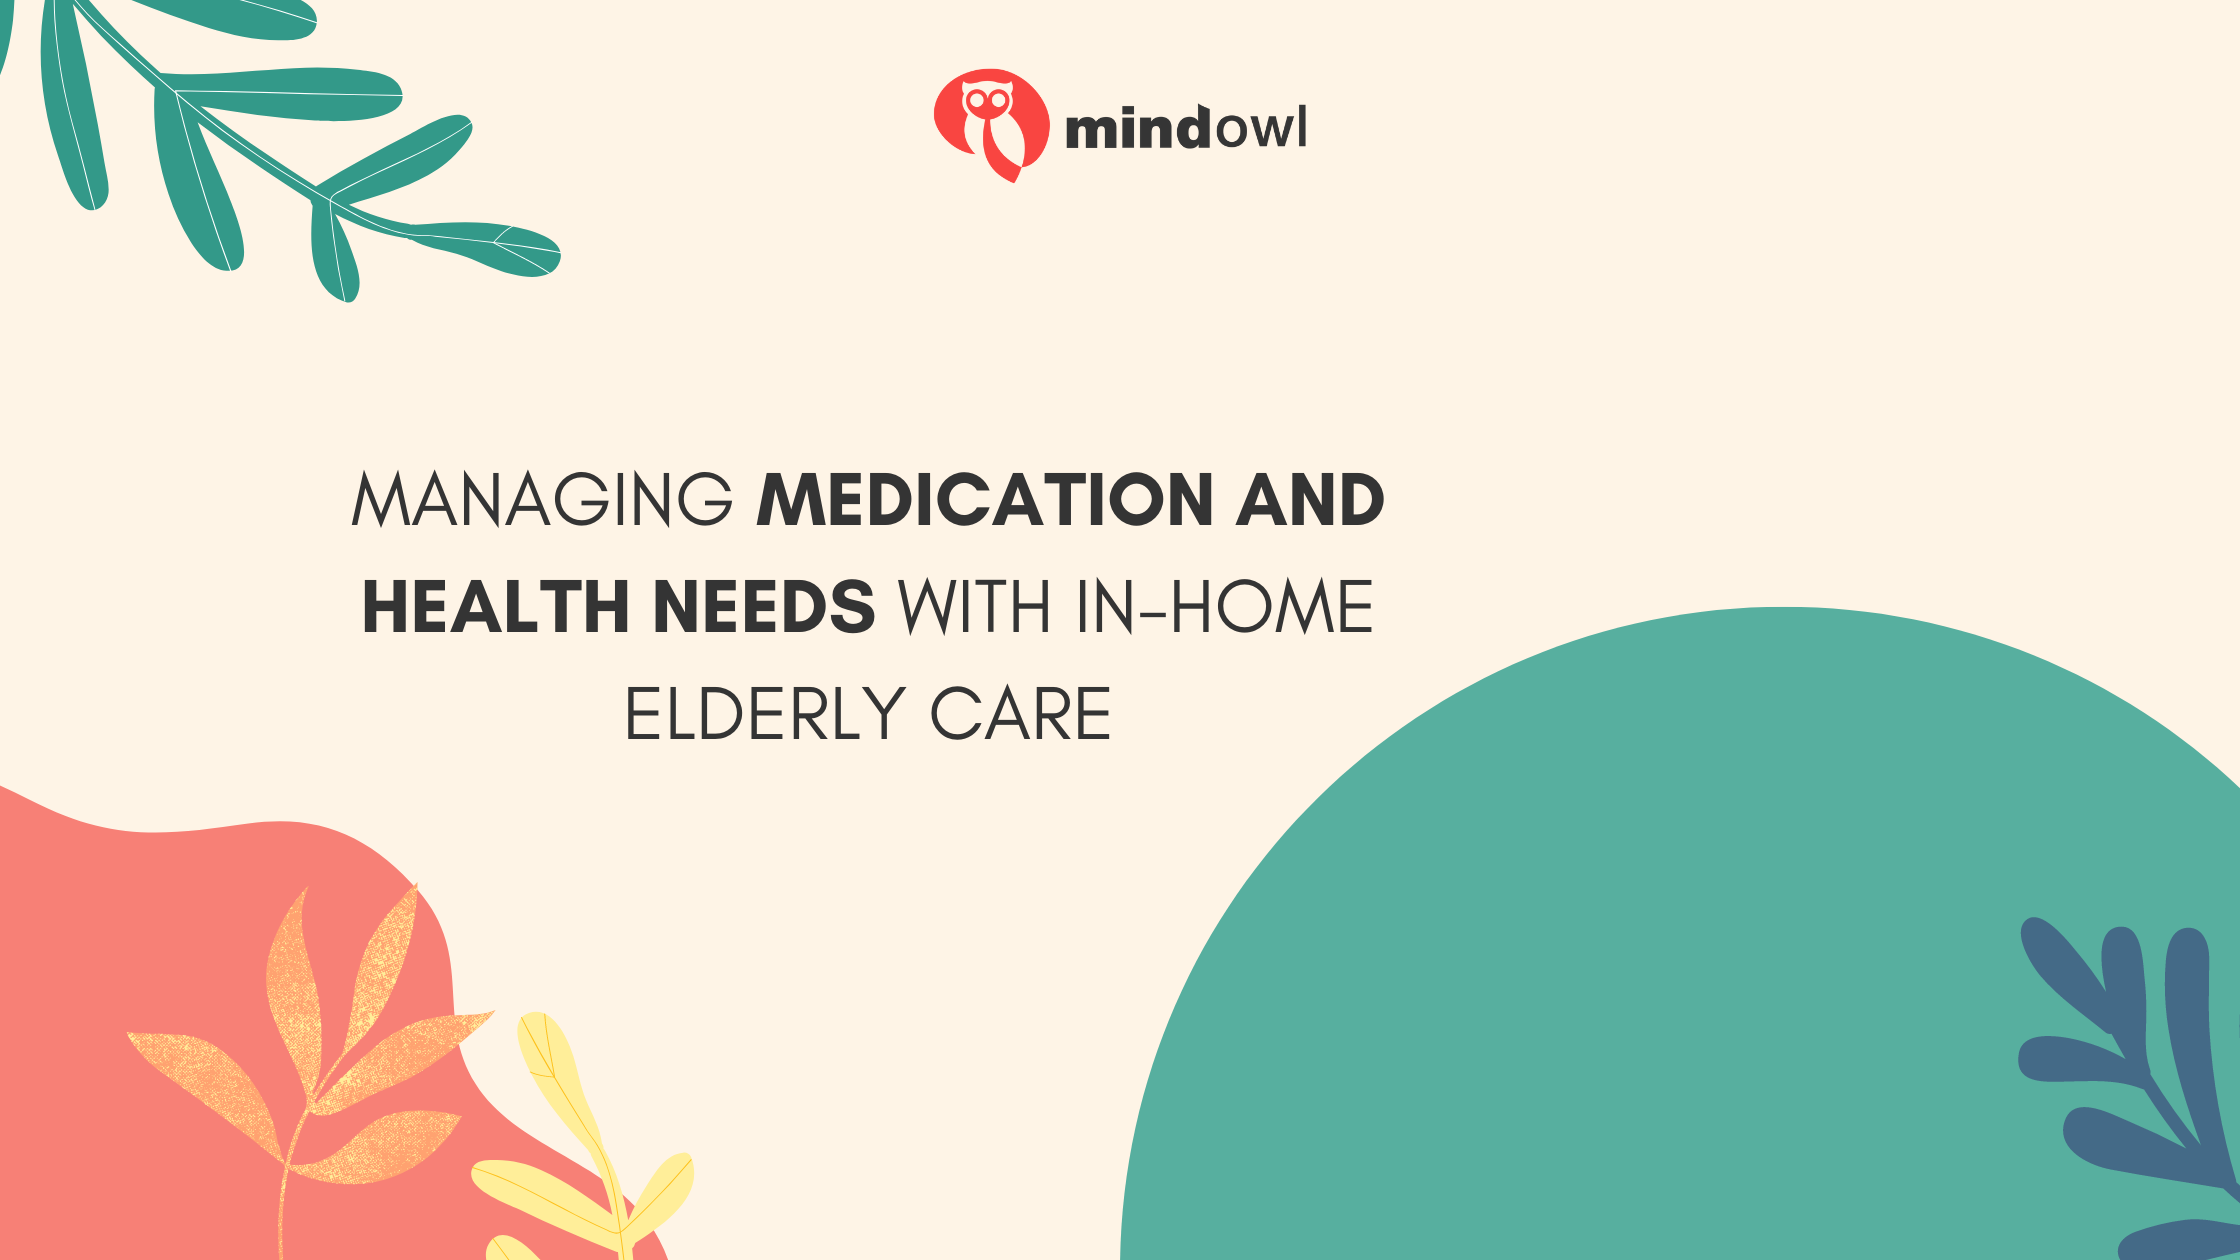 Managing Medication and Health Needs with In-Home Elderly Care